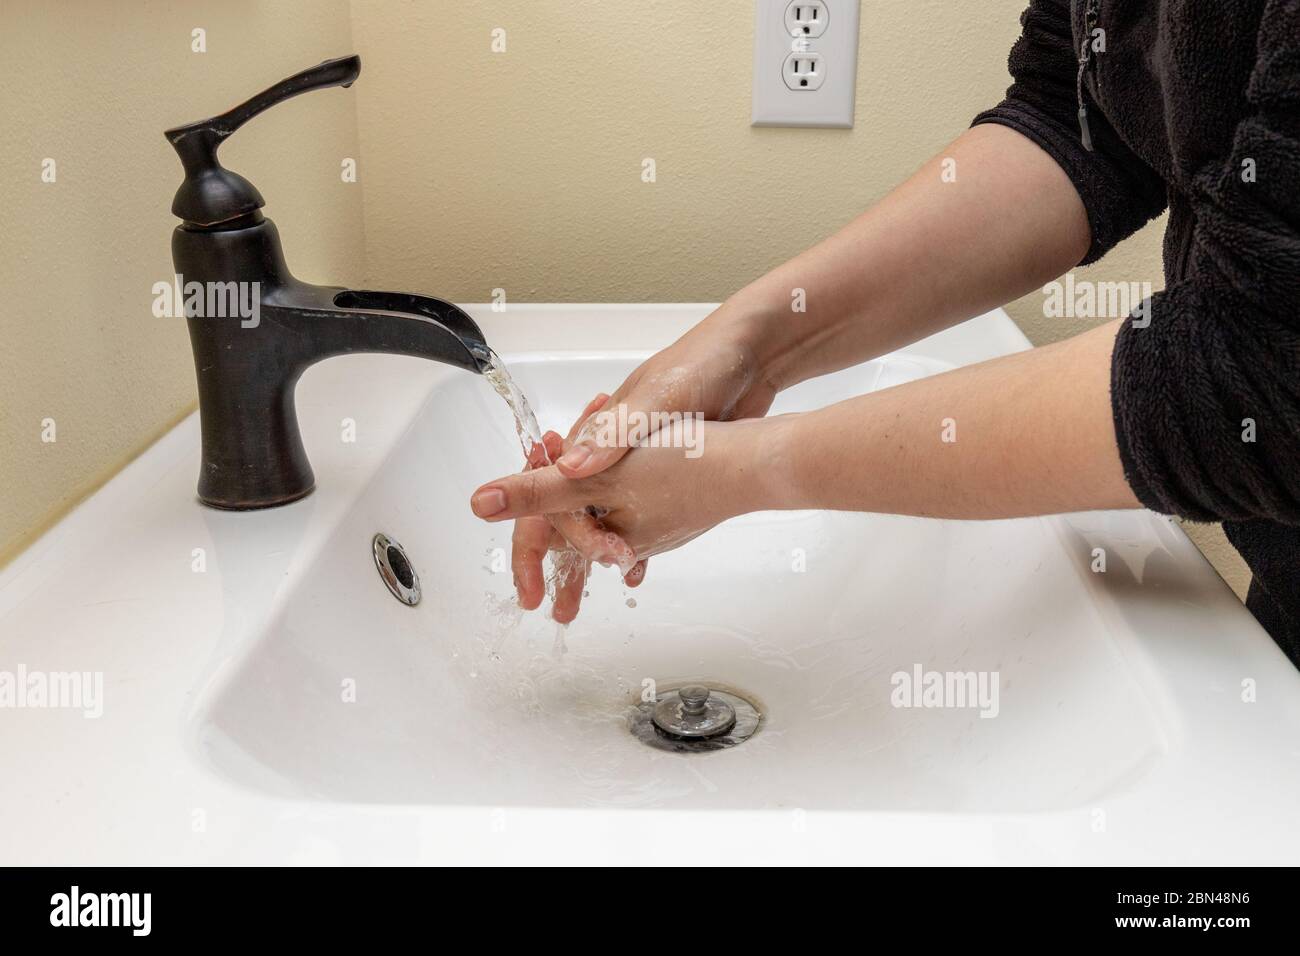 Female Washing Hands Between Fingers on Hands to Protect Against Germs Stock Photo